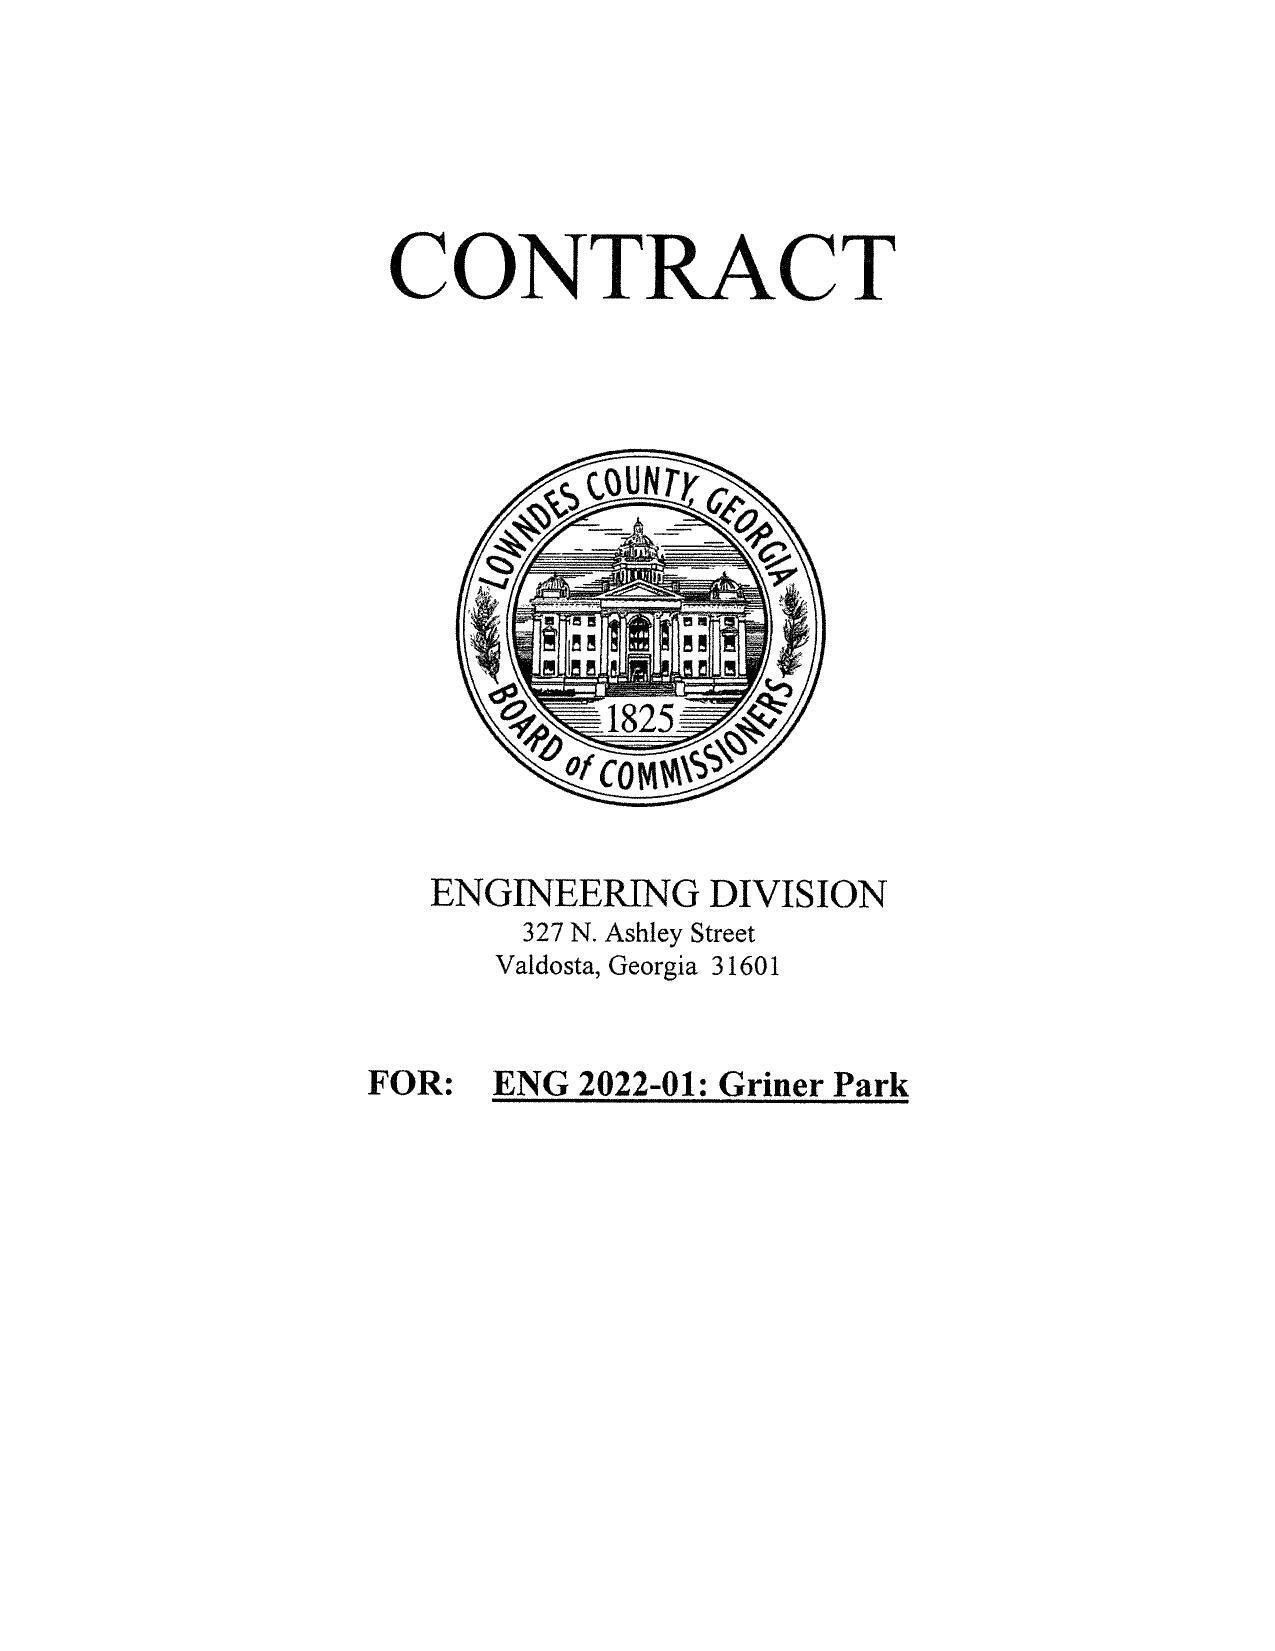 CONTRACT with Rountree Construction Company